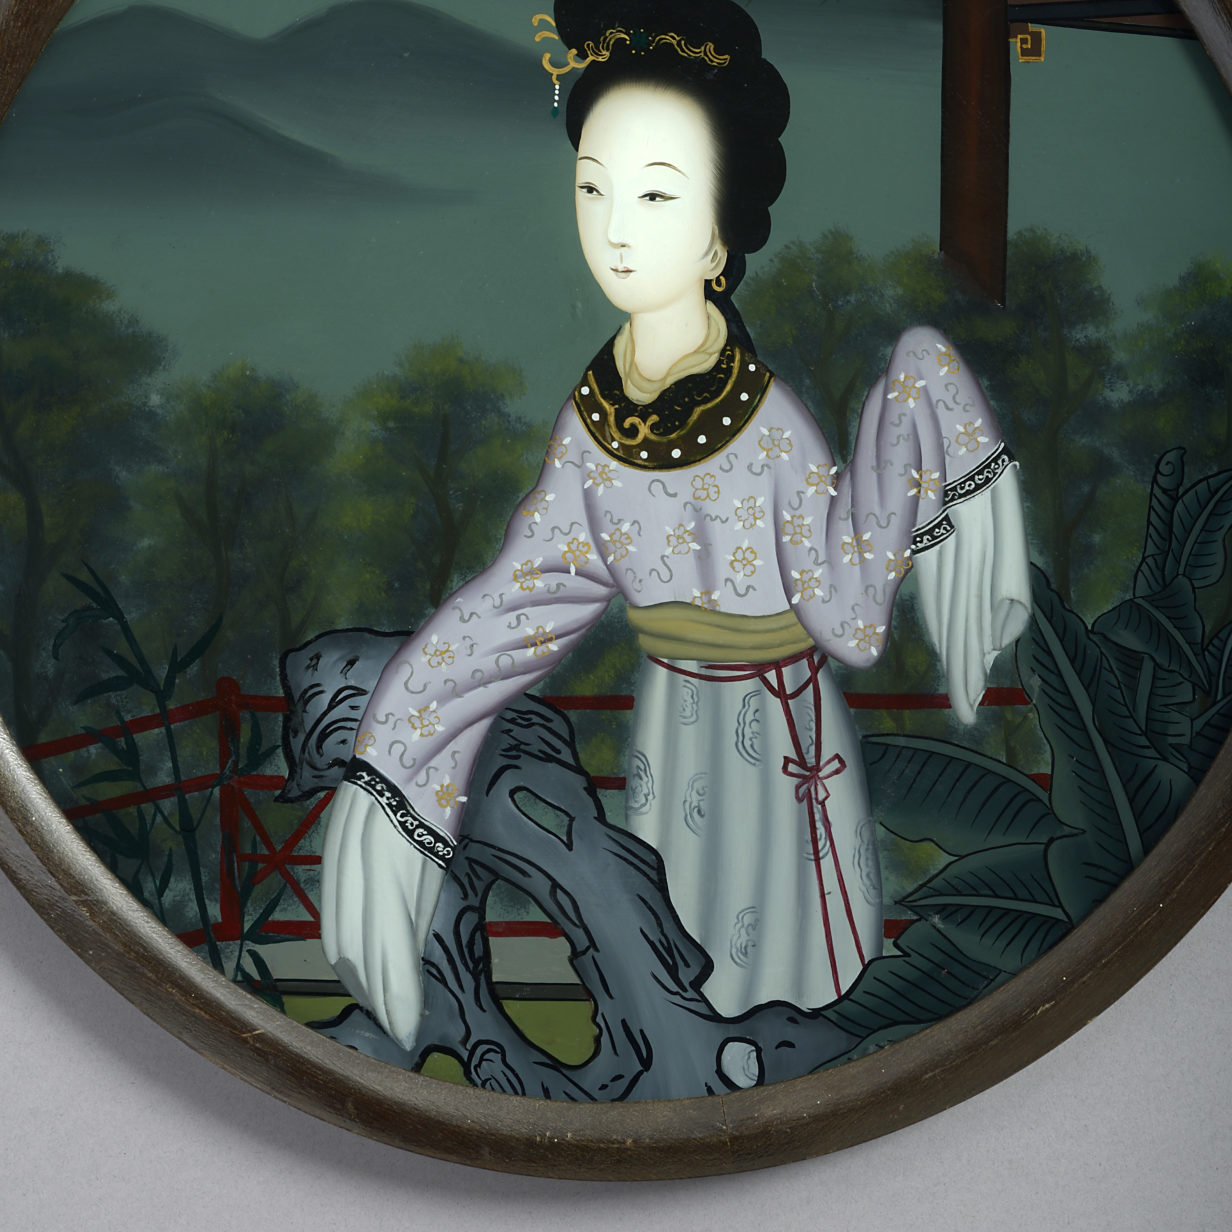 19th century reverse glass portrait of a lady